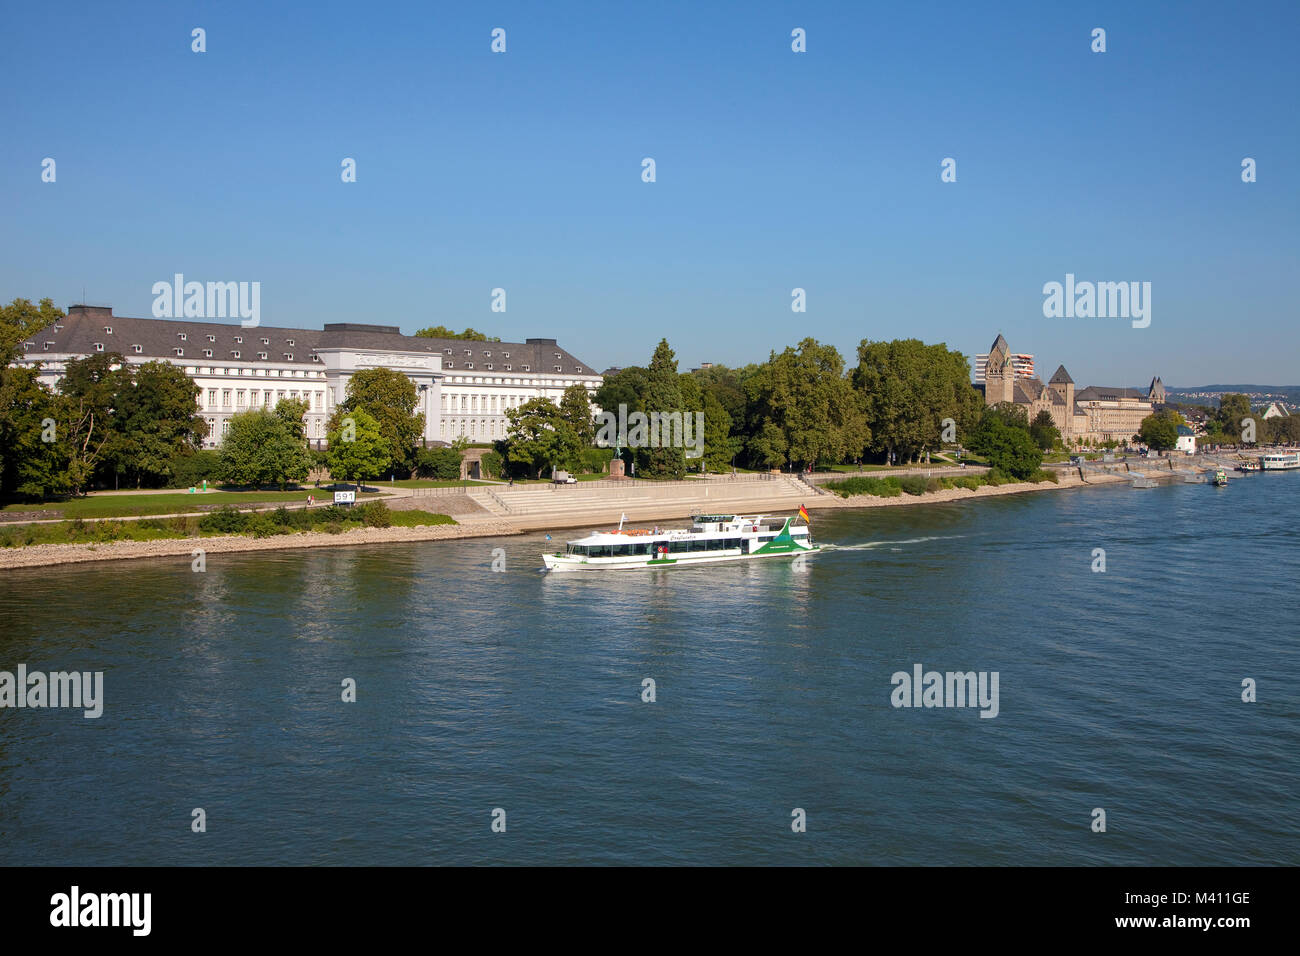 Excursion ship on Rhine river at the Prince-elector castle, Coblenz, Rhineland-Palatinate, Germany, Europe Stock Photo